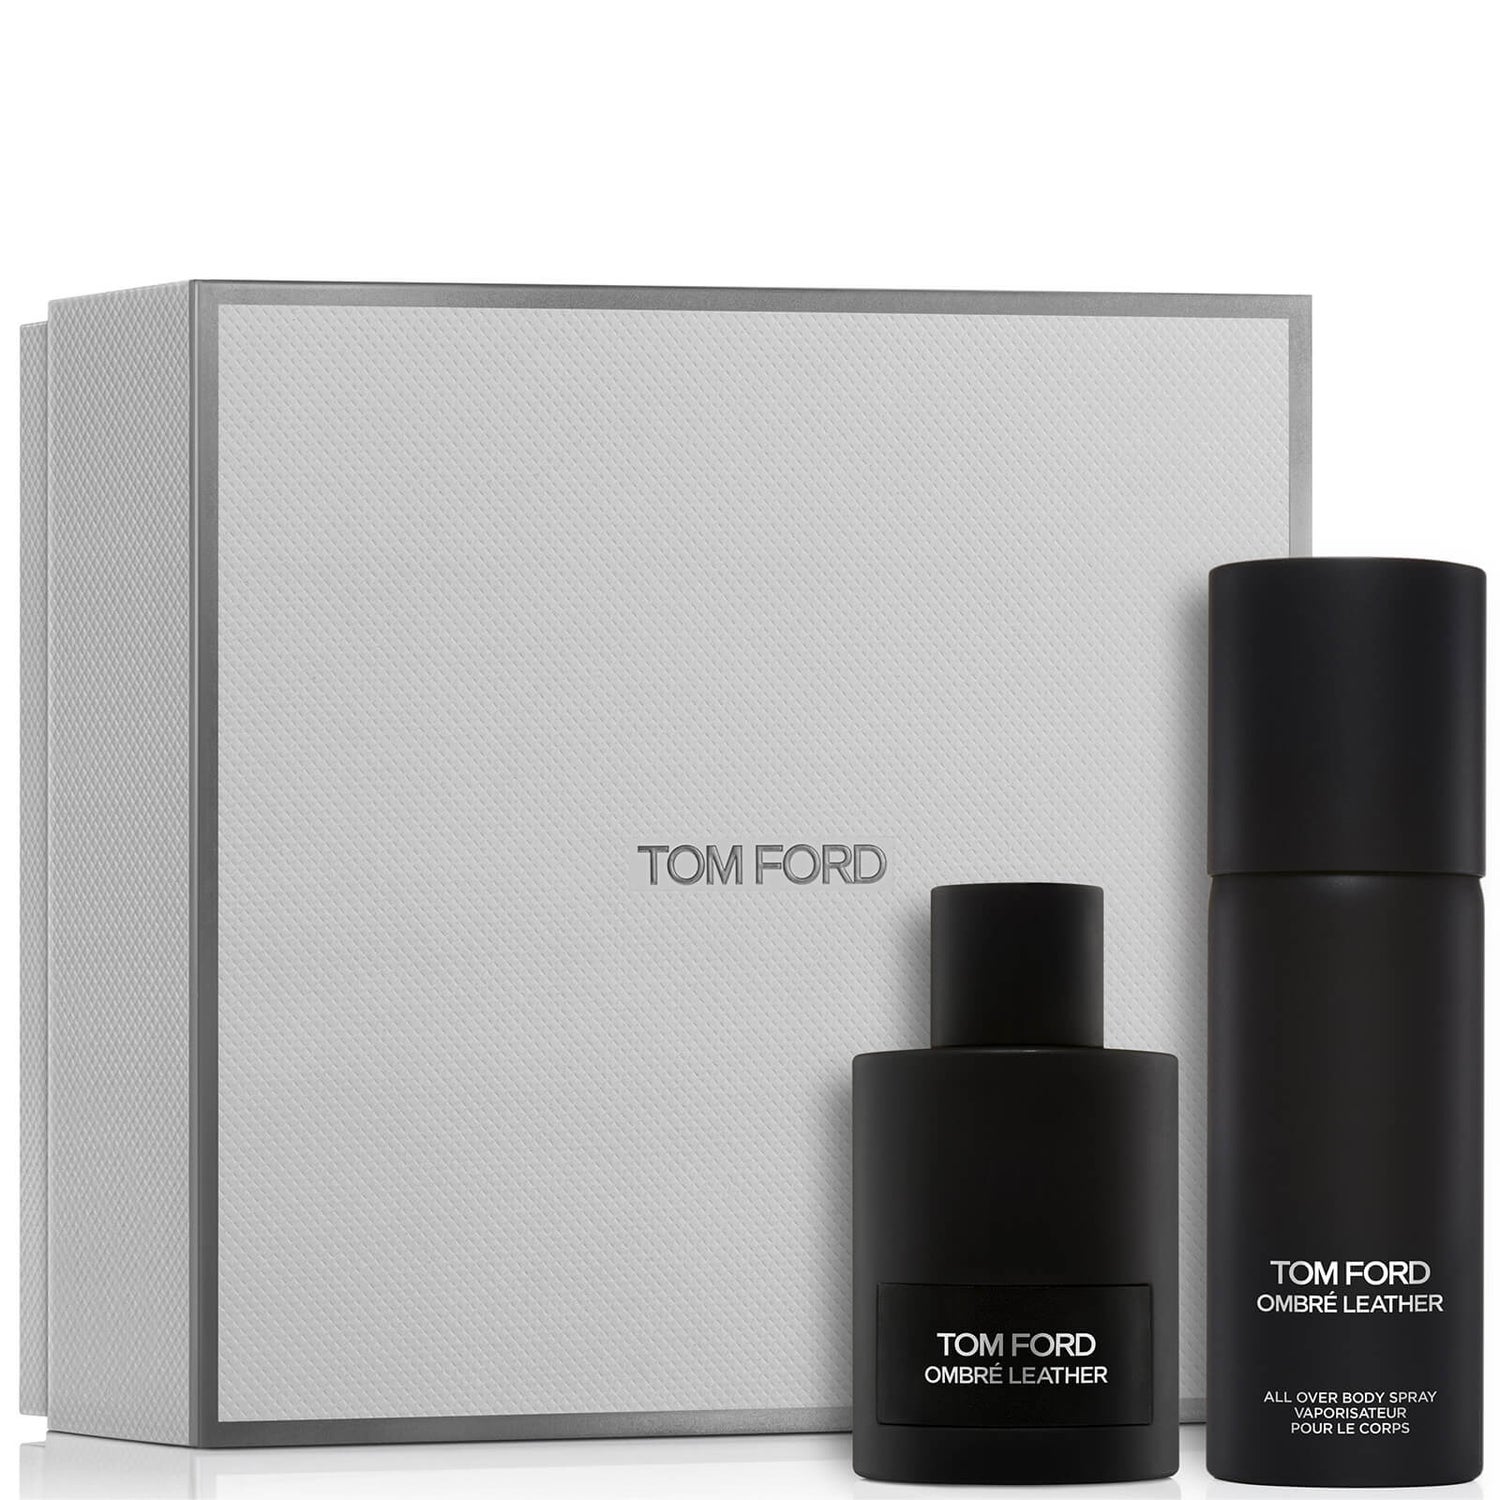 Tom Ford Ombre Leather 100ml & Aob Set